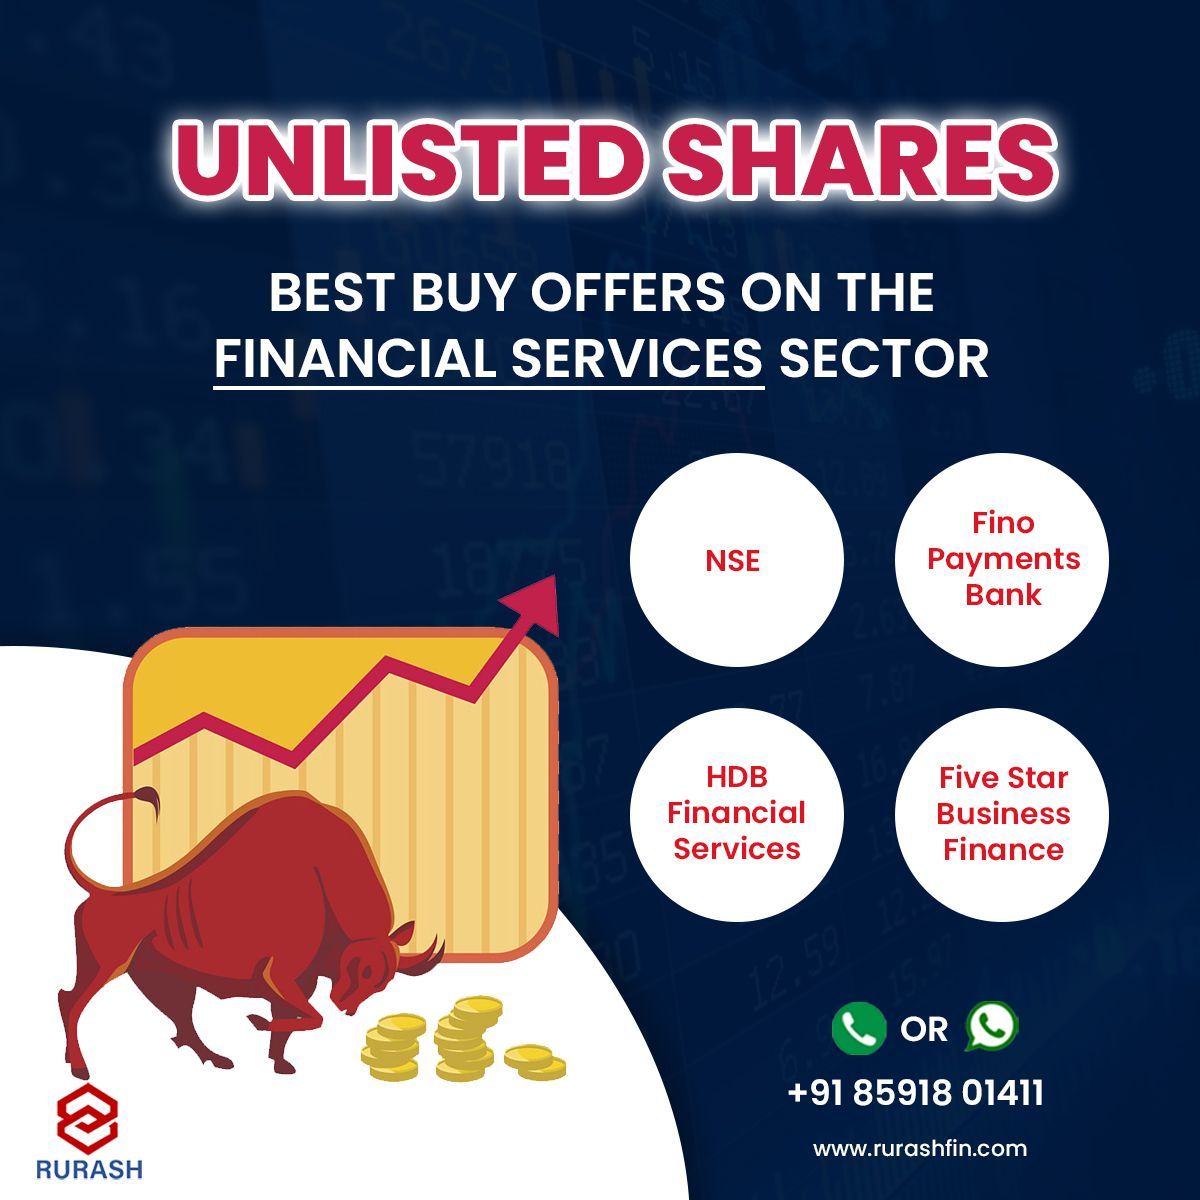 Best Unlisted Stocks and Shares Available Now | RURASHServicesInvestment - Financial PlanningAll Indiaother